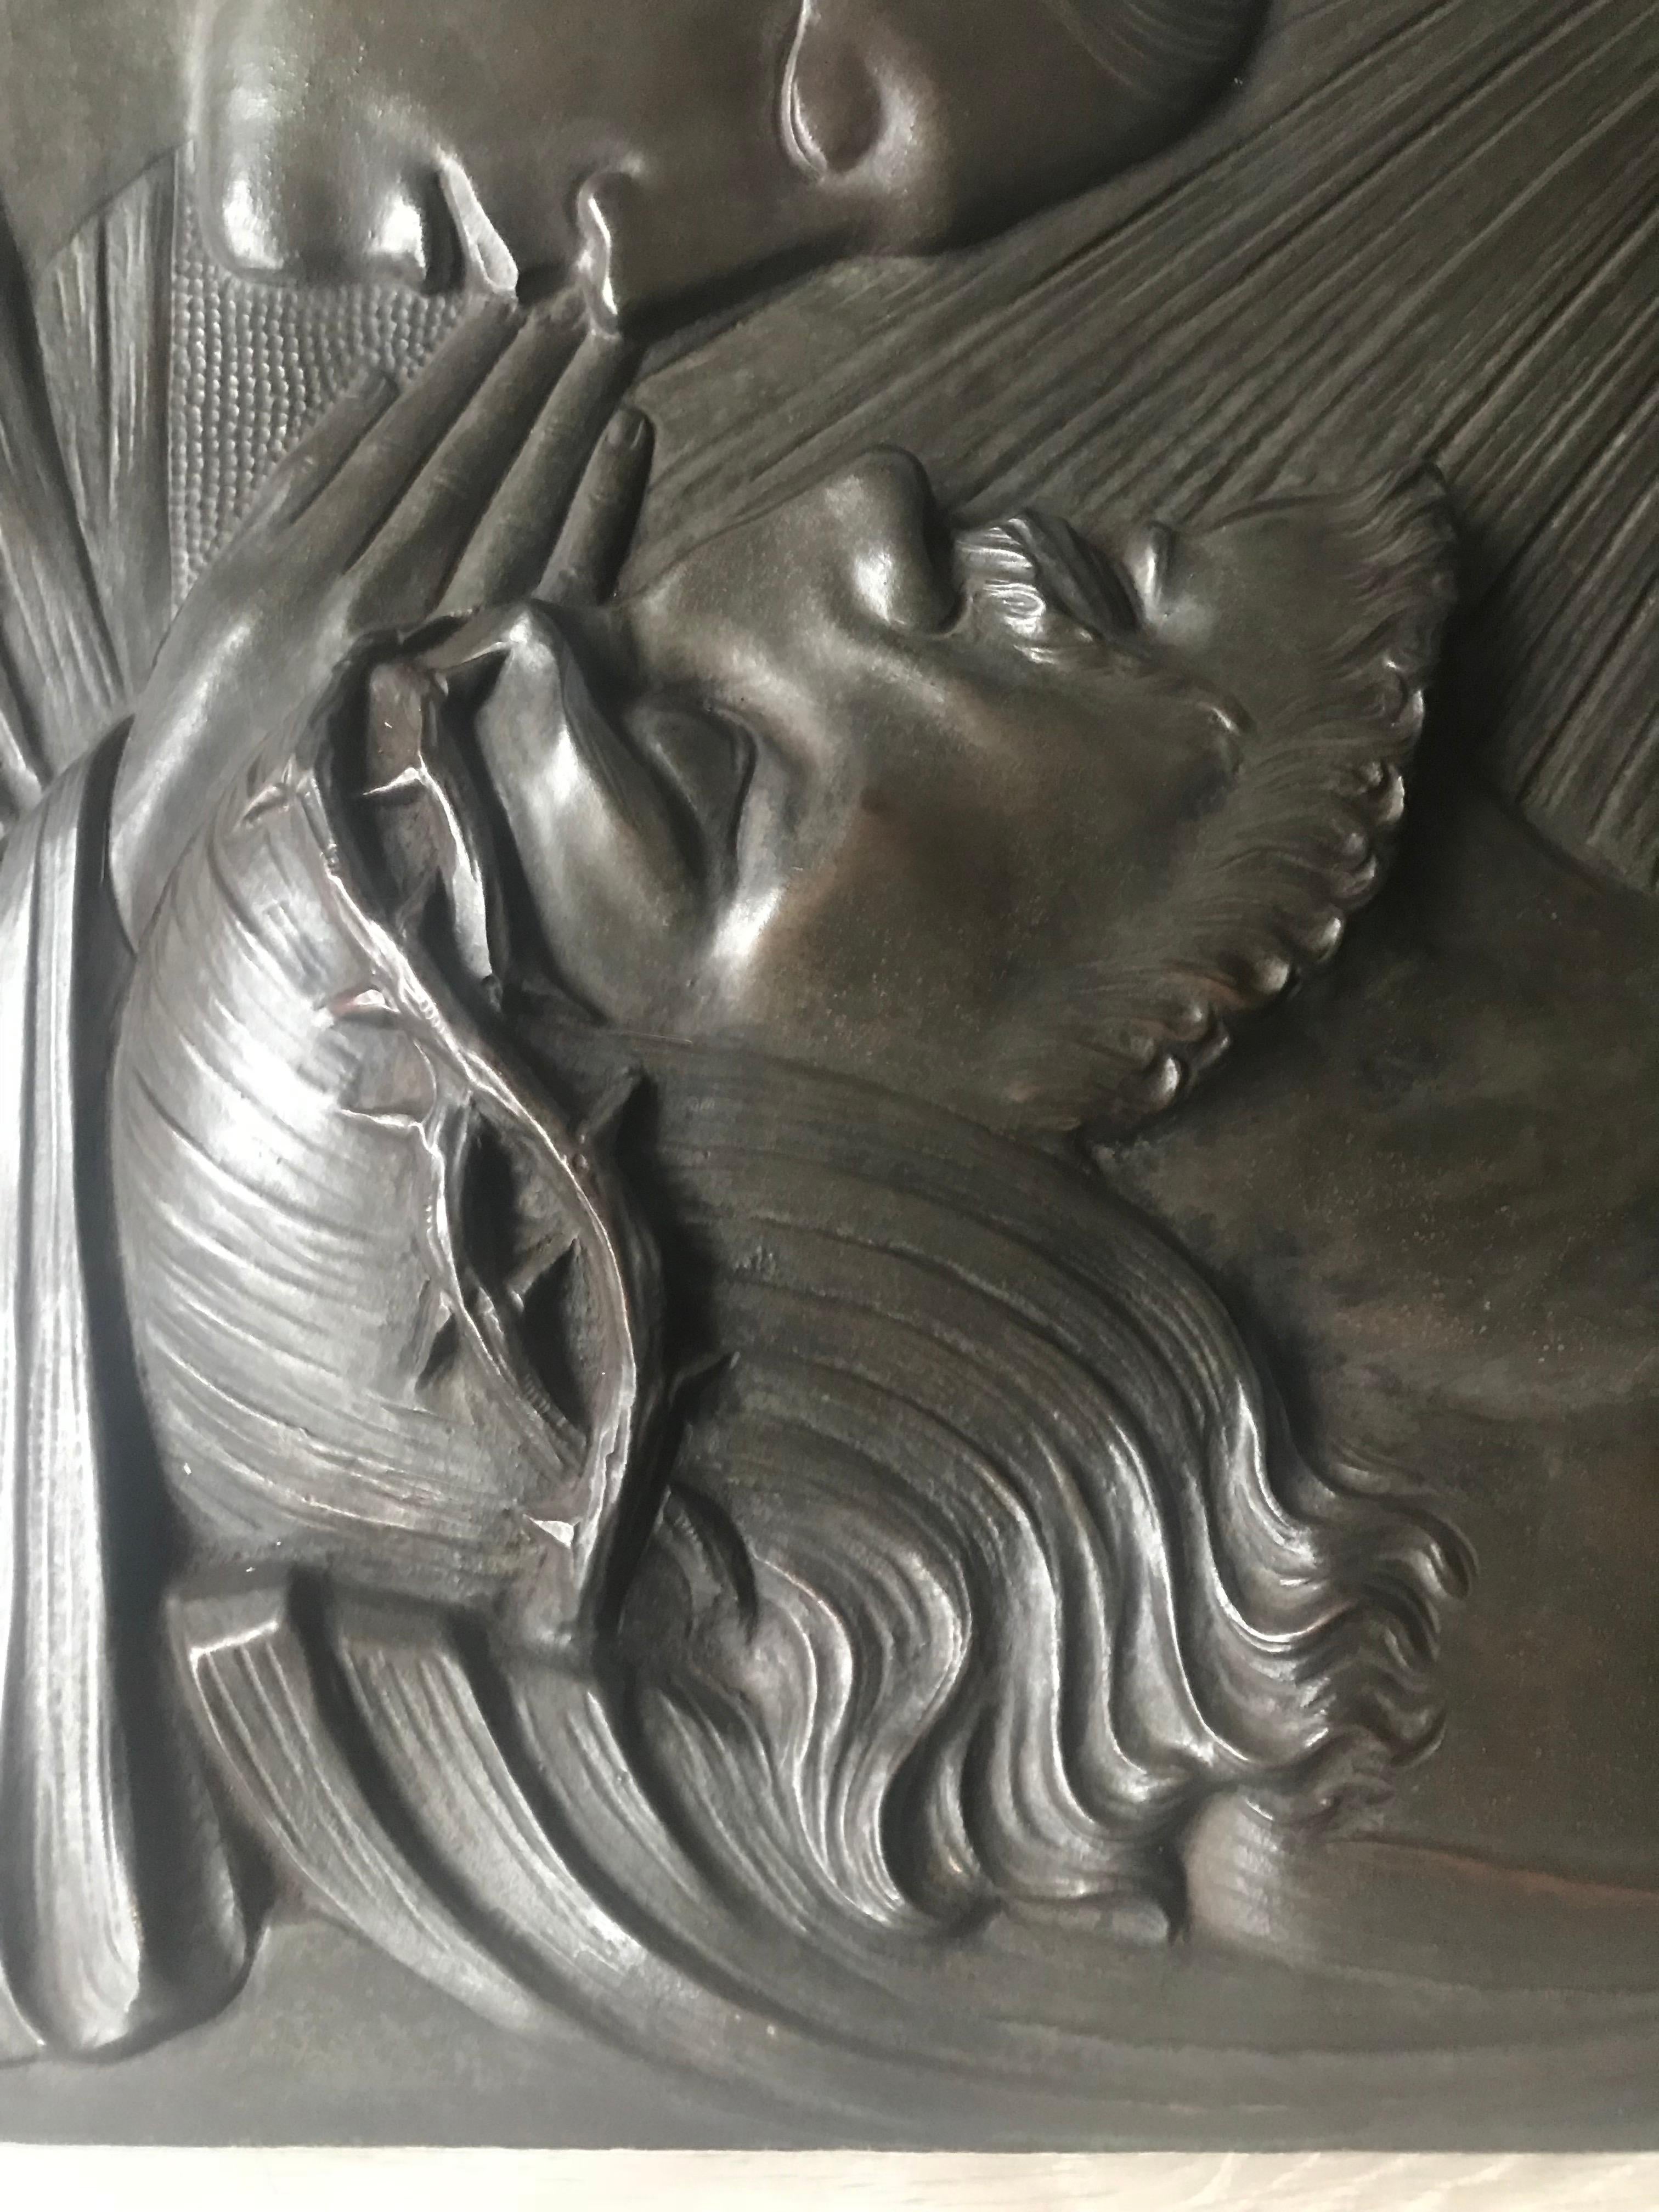 Large and heavy Art Deco bronze wall sculpture of the pieta by Silvain Norga

This large bronze wall plaque depicts the Virgin Mary praying over the body of Jesus Christ after the Crucifixion. The typical Art Deco hairstyle of Mother Mary and the